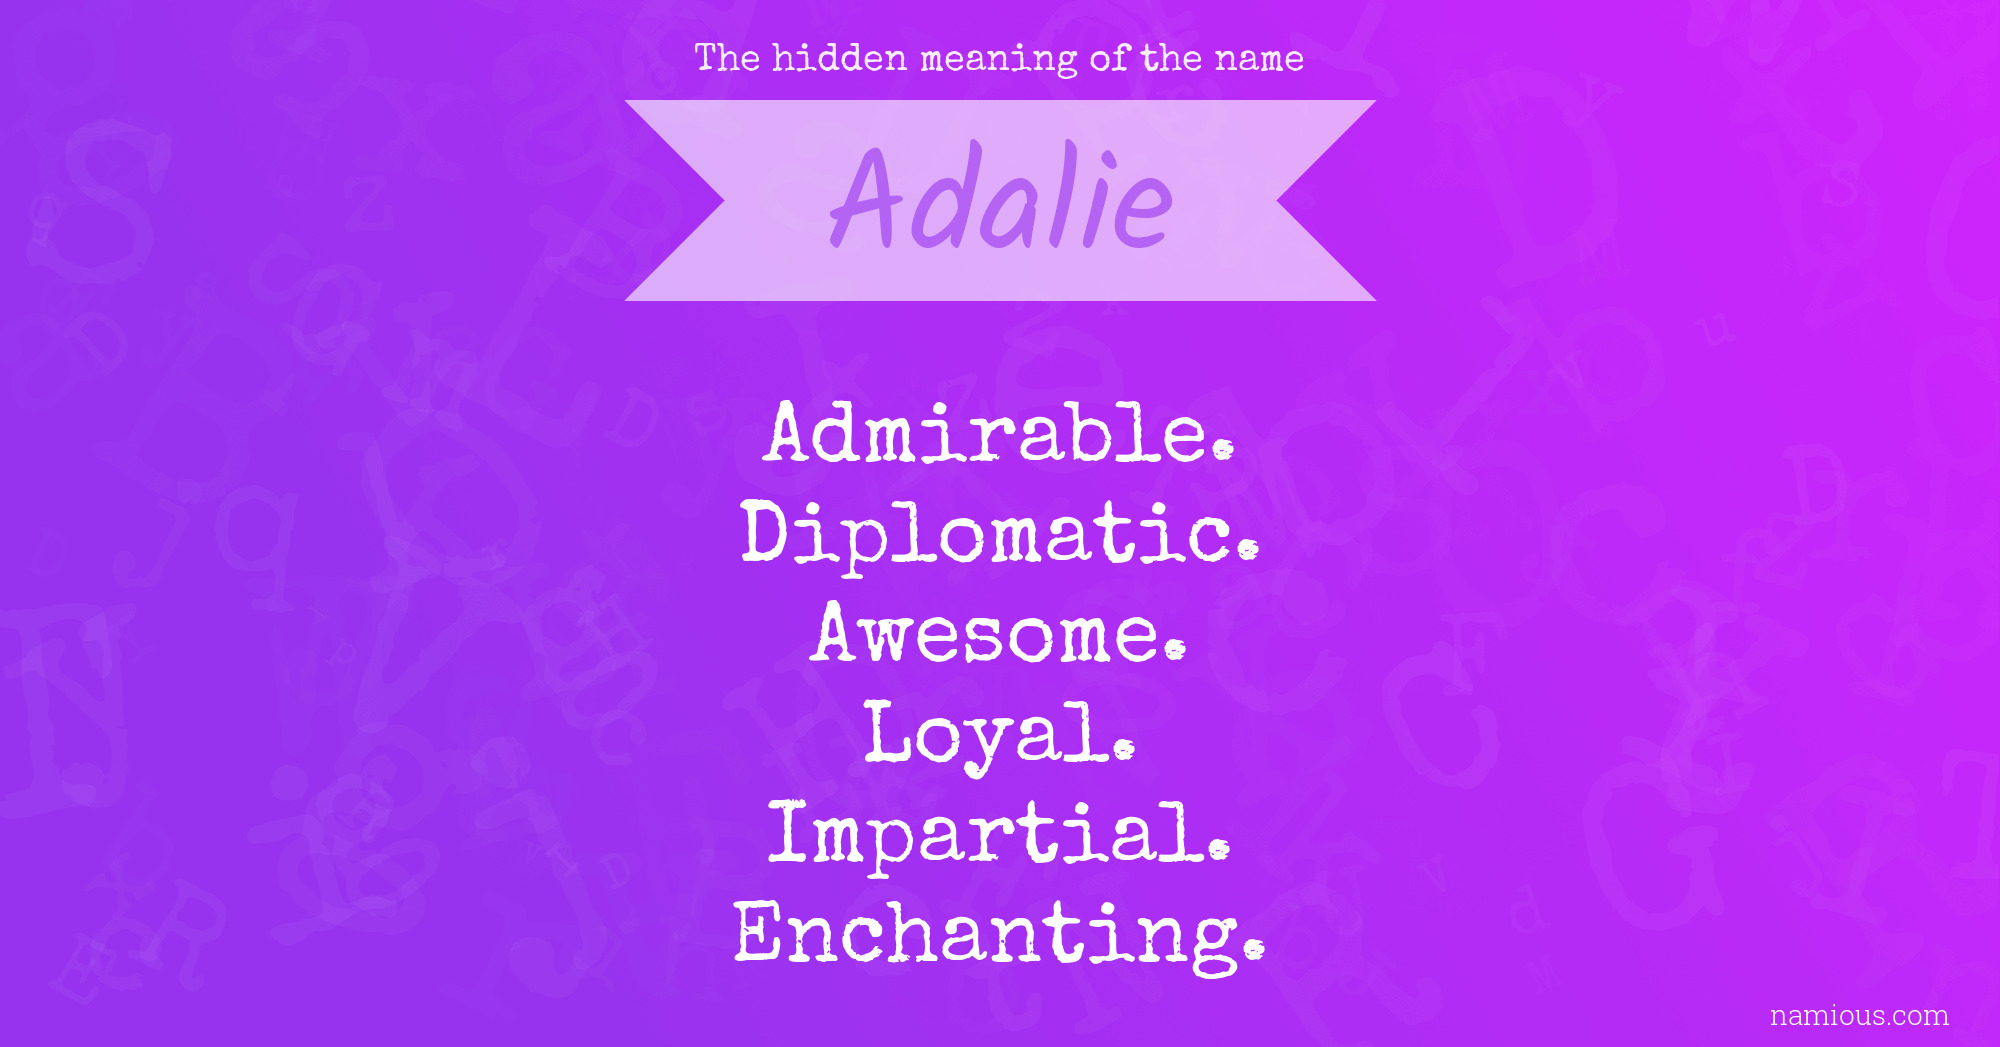 The hidden meaning of the name Adalie